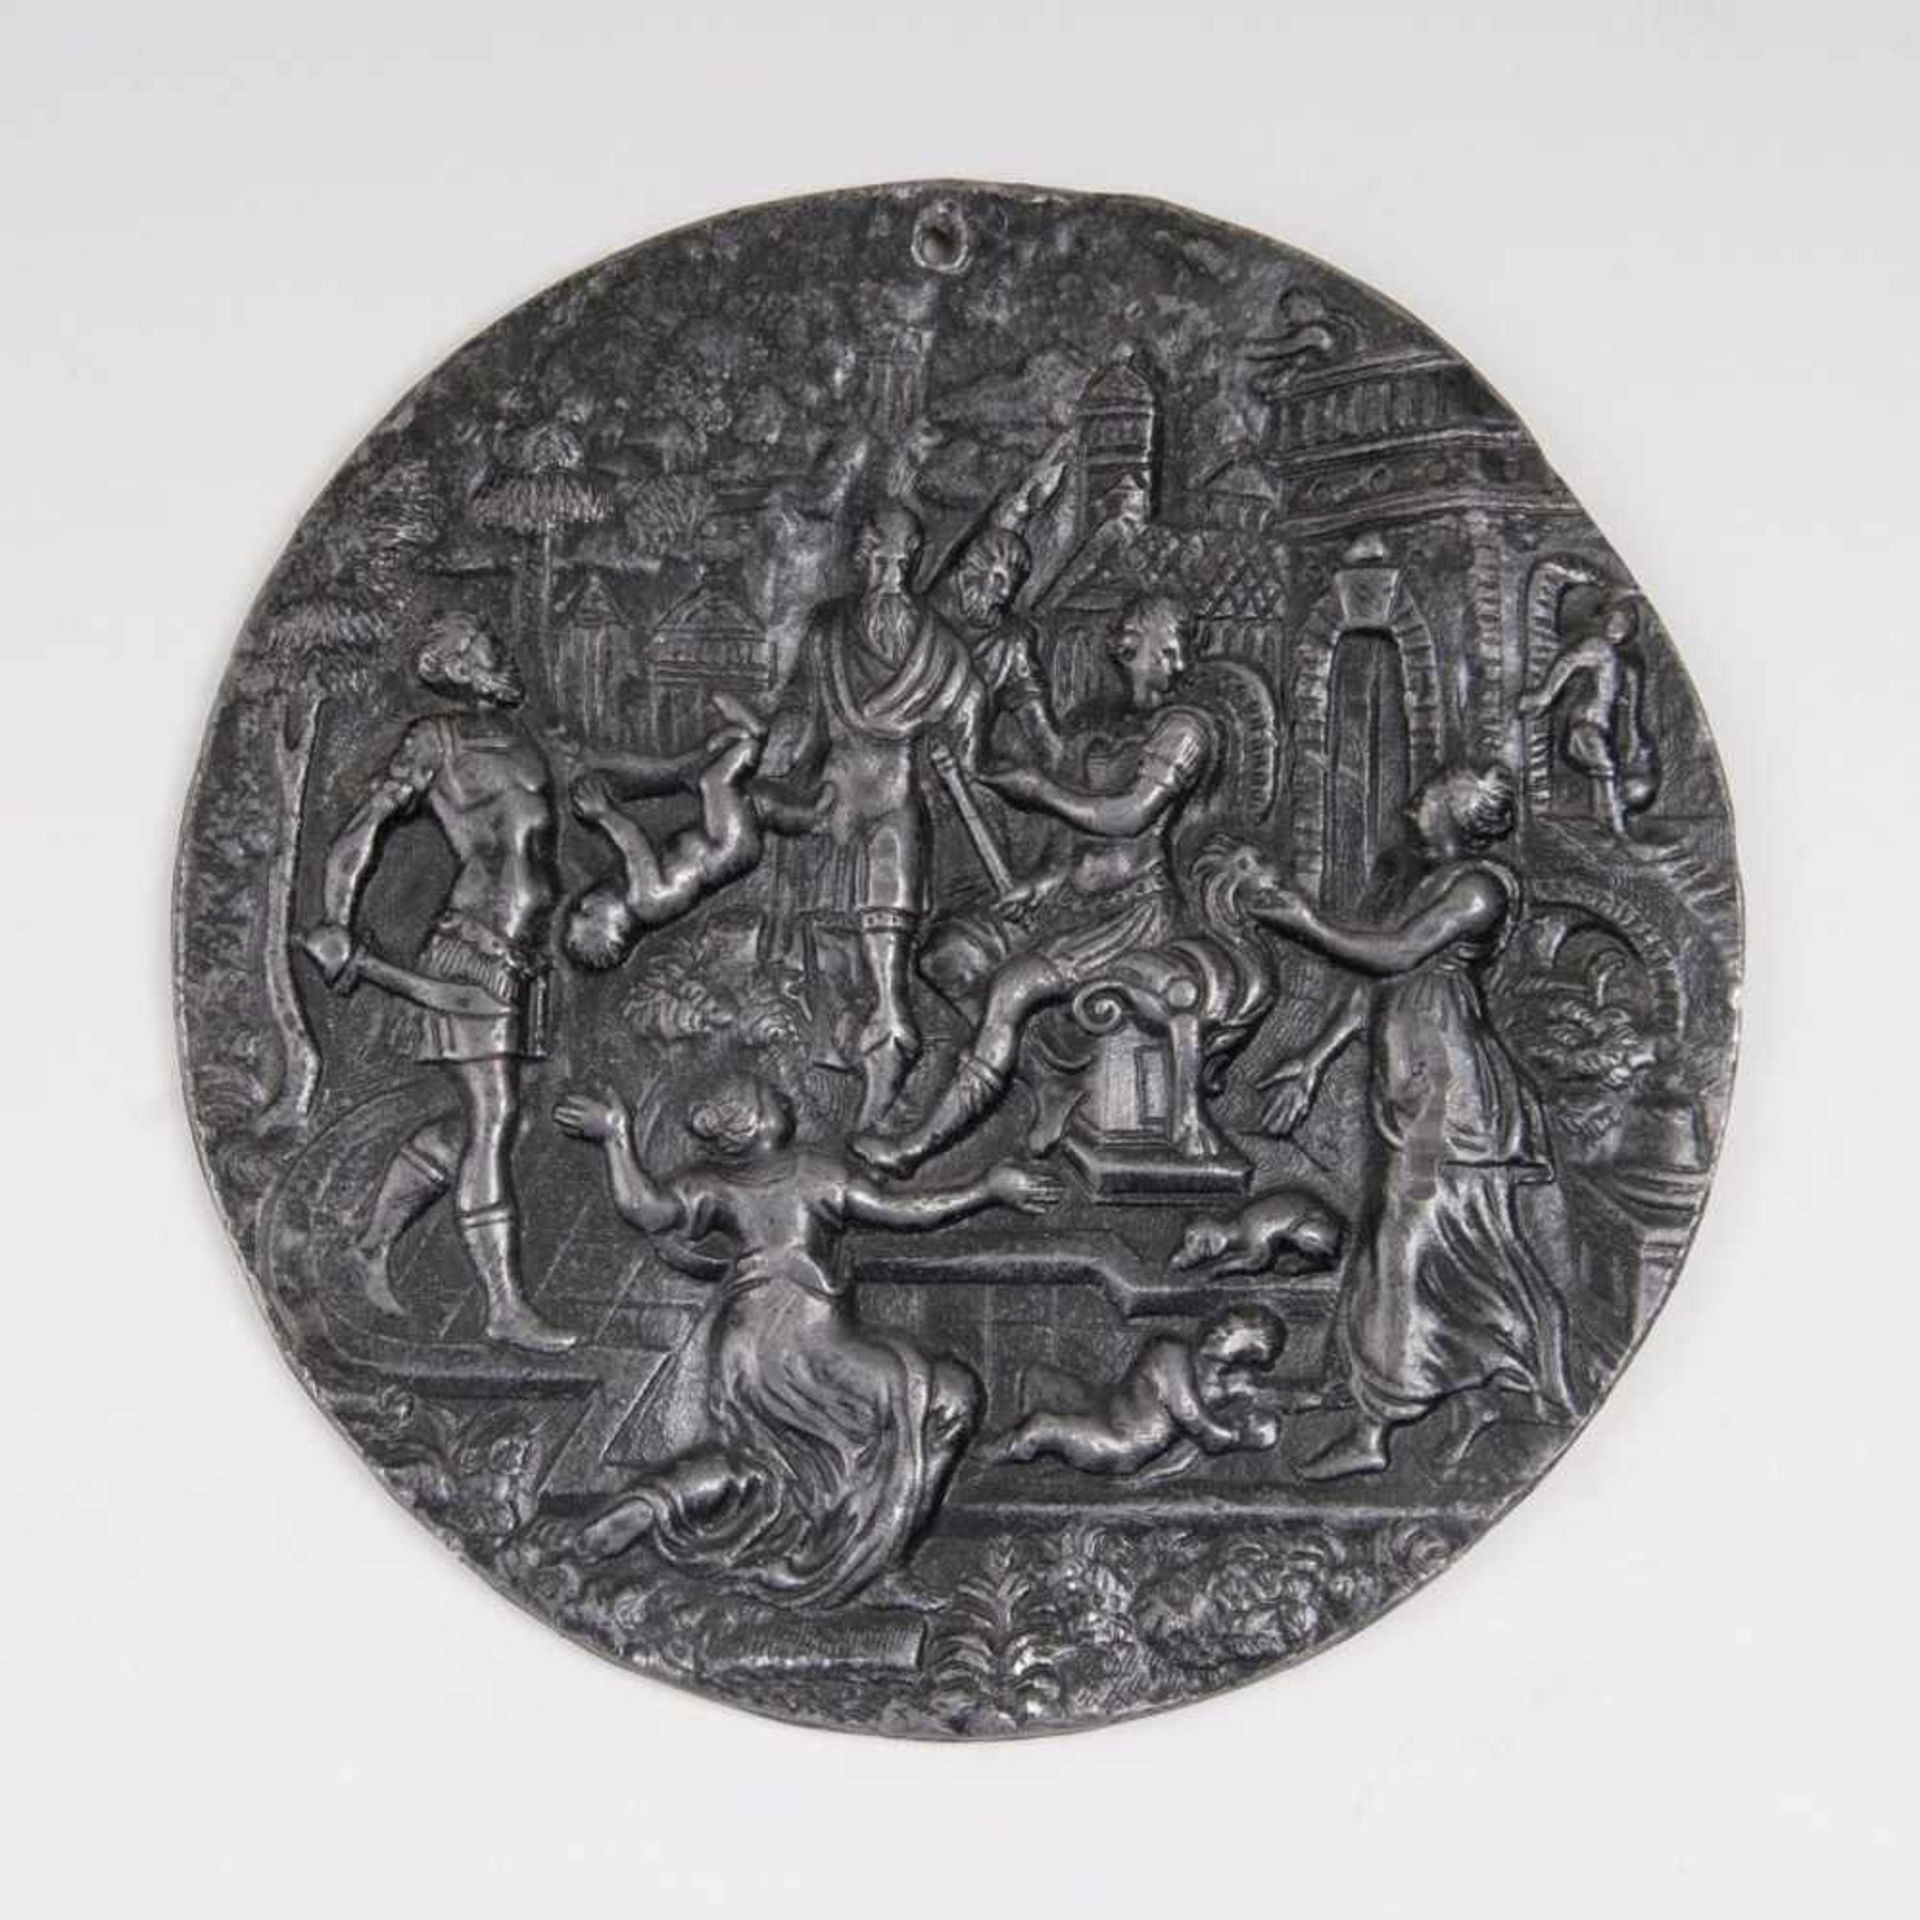 A Reliefed Plaque 'The Judgment of Solomon'Netherlands or Southern Germany, late 16th cent. Lead.